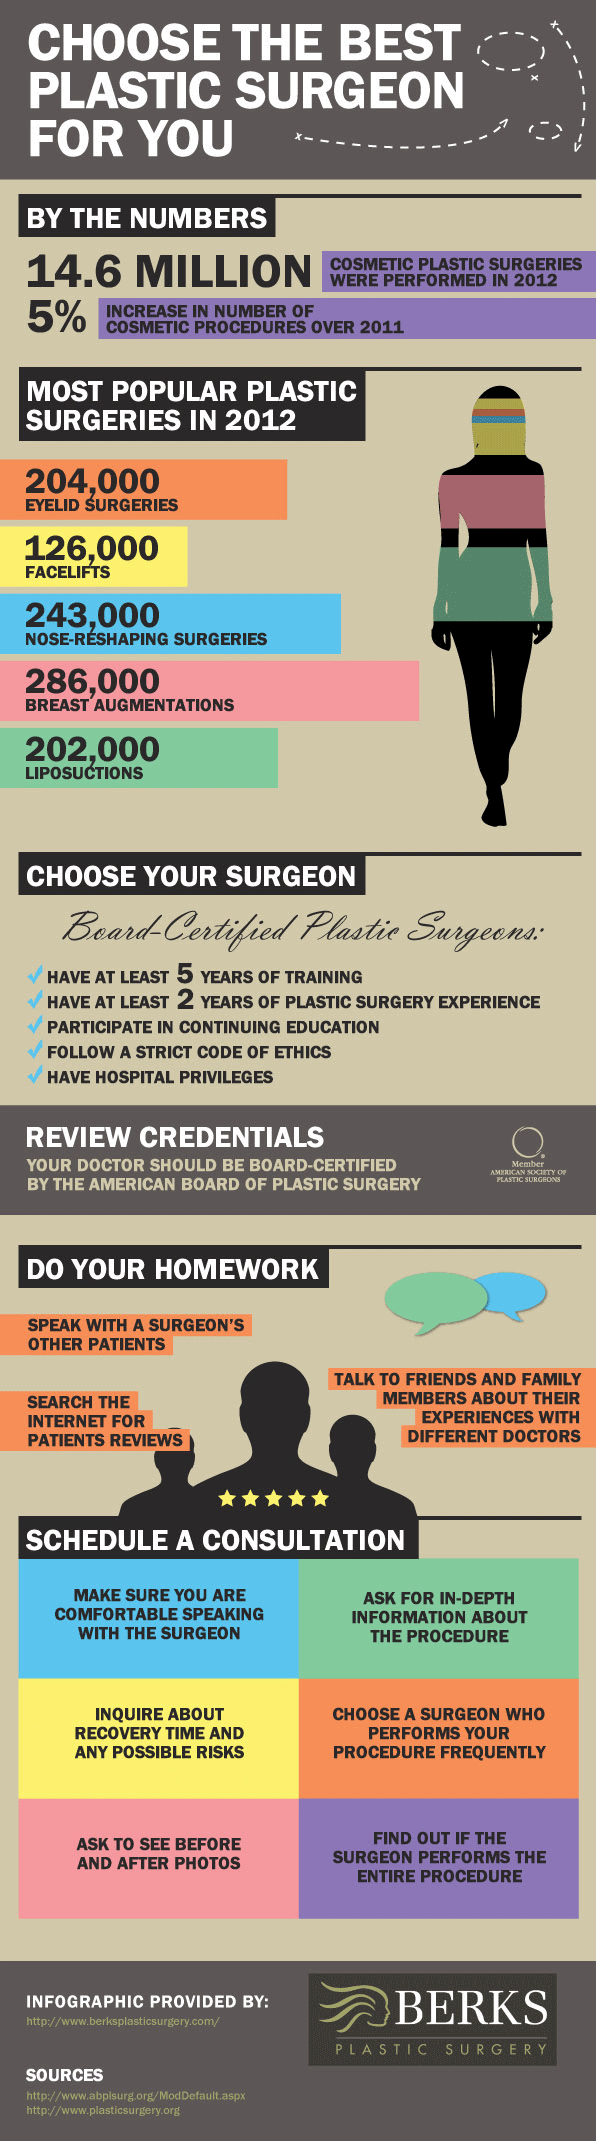 Choose the Best Plastic Surgeon for You Infographic